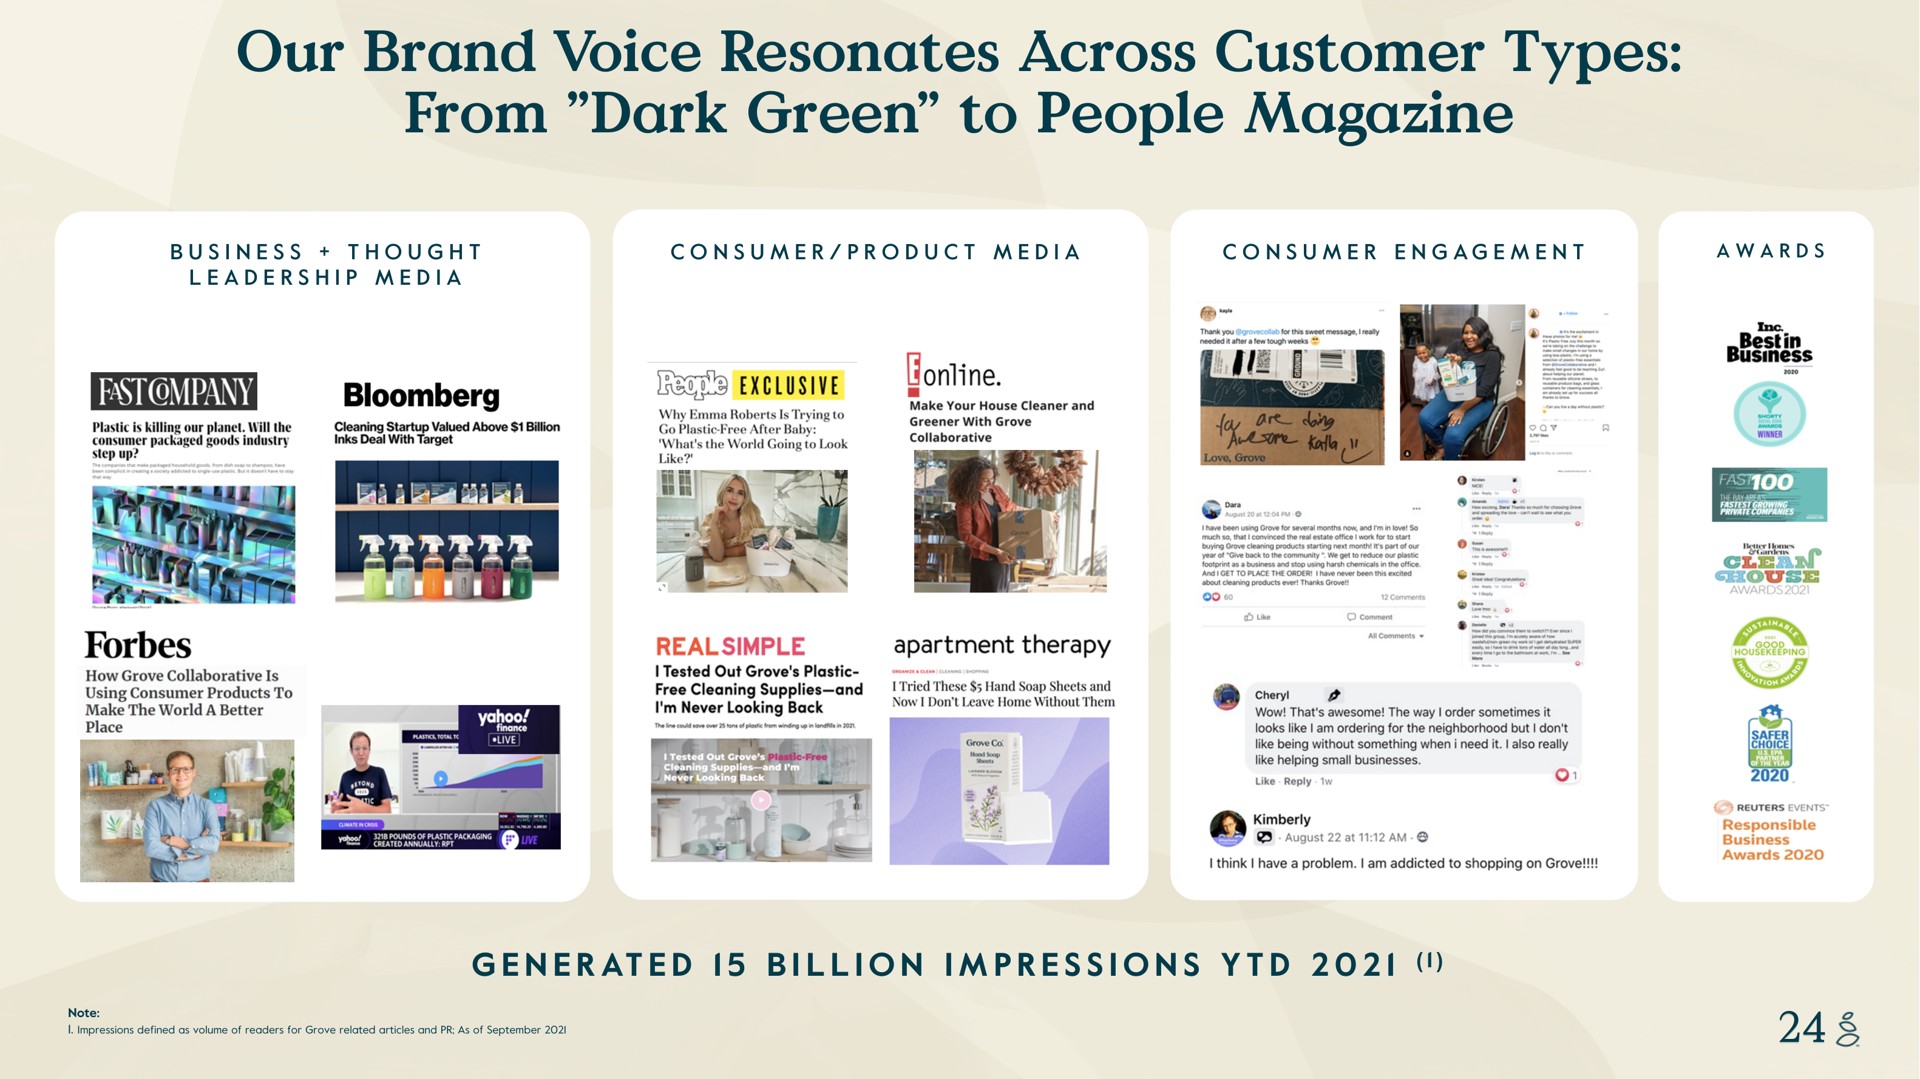 our brand voice resonates across customer types from dark green to people magazine consumer product media consumer engagement awards business thought leadership media valued above billion cleaning star inks deal with target plastic is killing planet will the consumer packaged goods industry step up place how grove collaborative is using consumer products make the world a better thank you needed it a few tough weeks for this sweet message really excuse is trying make your house cleaner and greener with grove a why why emma is trying go plastic free after baby what the world going look like gay real simple tested out grove plastic free cleaning supplies and i never looking back the line could tow over plot winding up in in apartment therapy i tried these hand soap sheets and now i don leave home without them ten about cleaning products ever thanks grove wow that awesome the way order sometimes it looks like am ordering for the neighborhood but don like being without something when i need it also really like helping small businesses like reply august at am think have a problem am addicted shopping on grove note impressions defined as volume of readers for grove related articles and as of generated billion impressions business event responsible business awards | Grove